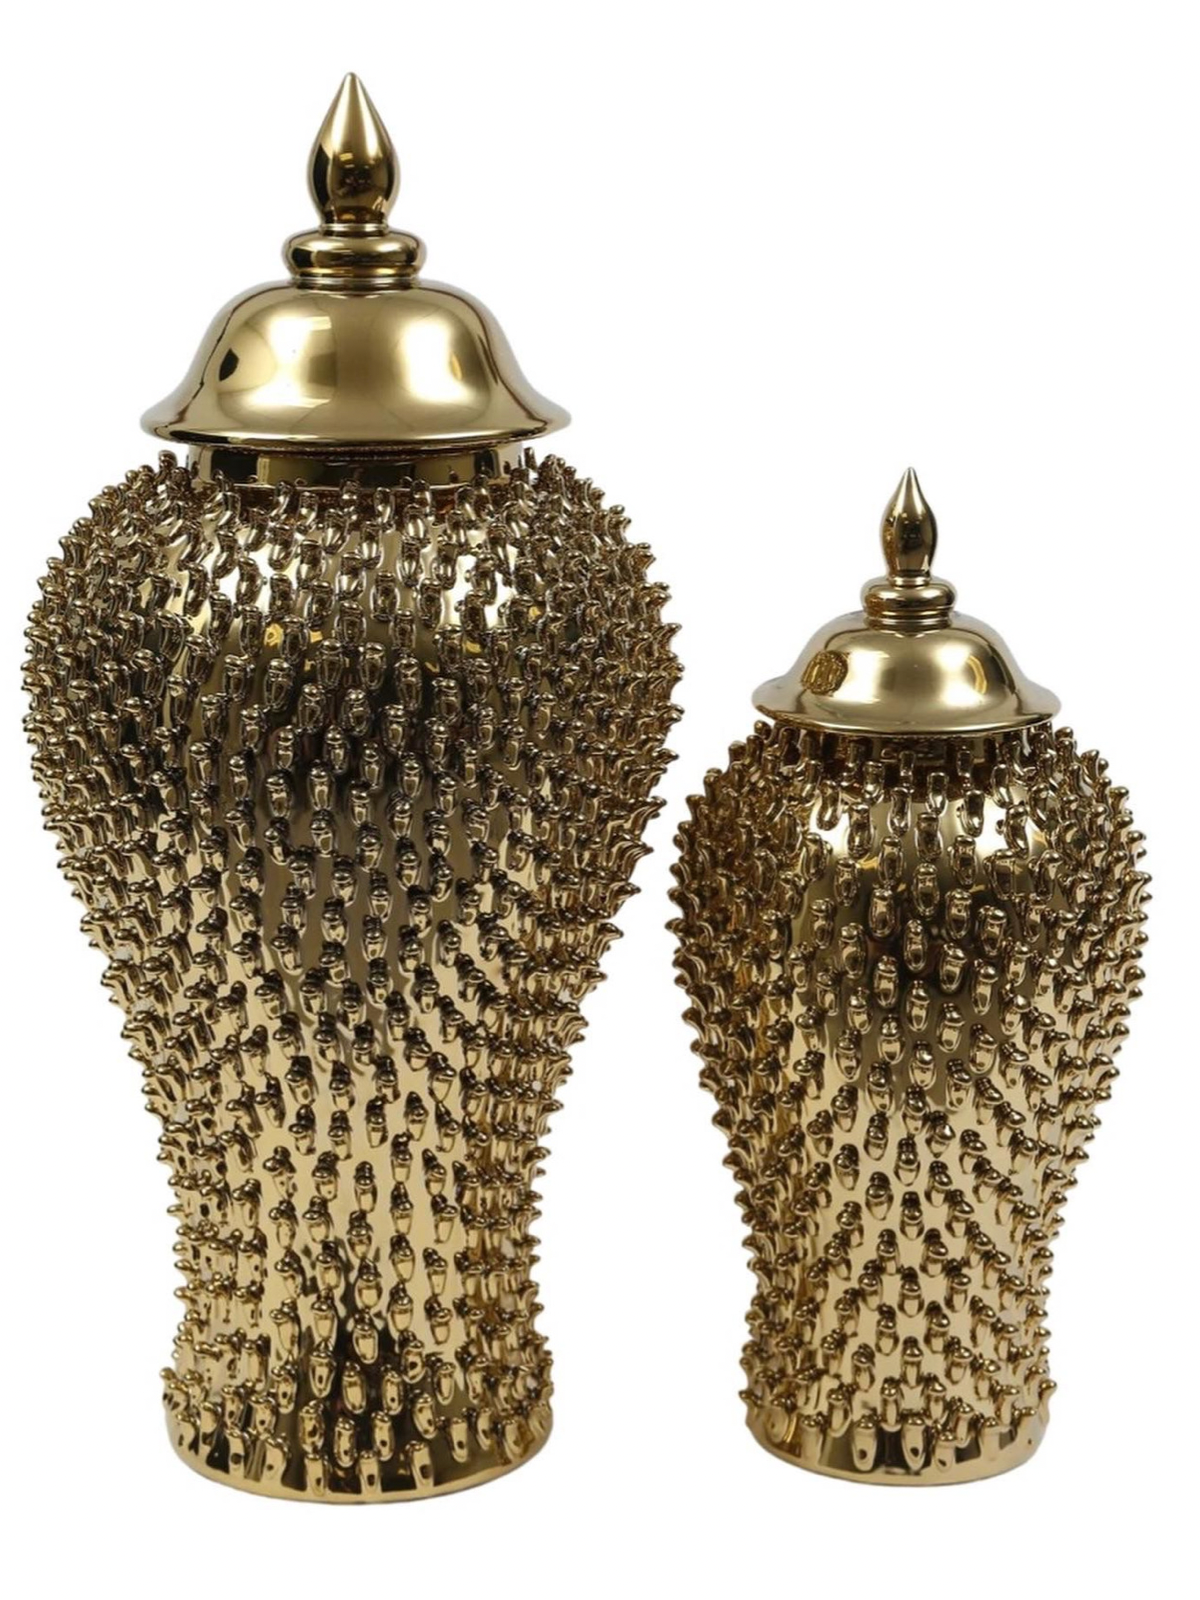 Gold studded luxury decorative ginger jar with lid available in 2 sizes sold by KYA Home Decor.